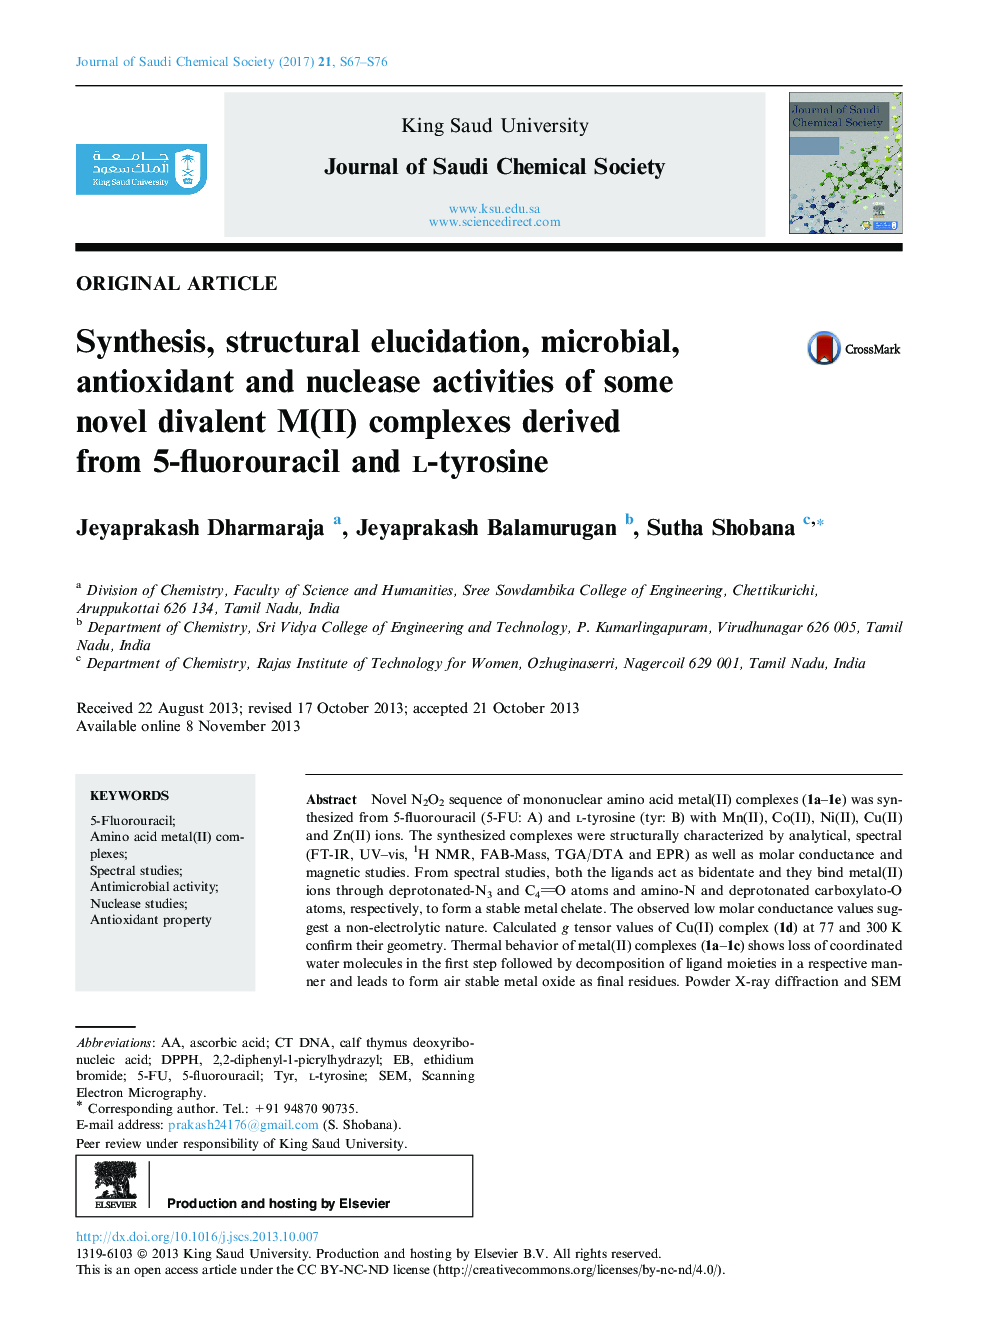 Synthesis, structural elucidation, microbial, antioxidant and nuclease activities of some novel divalent M(II) complexes derived from 5-fluorouracil and l-tyrosine